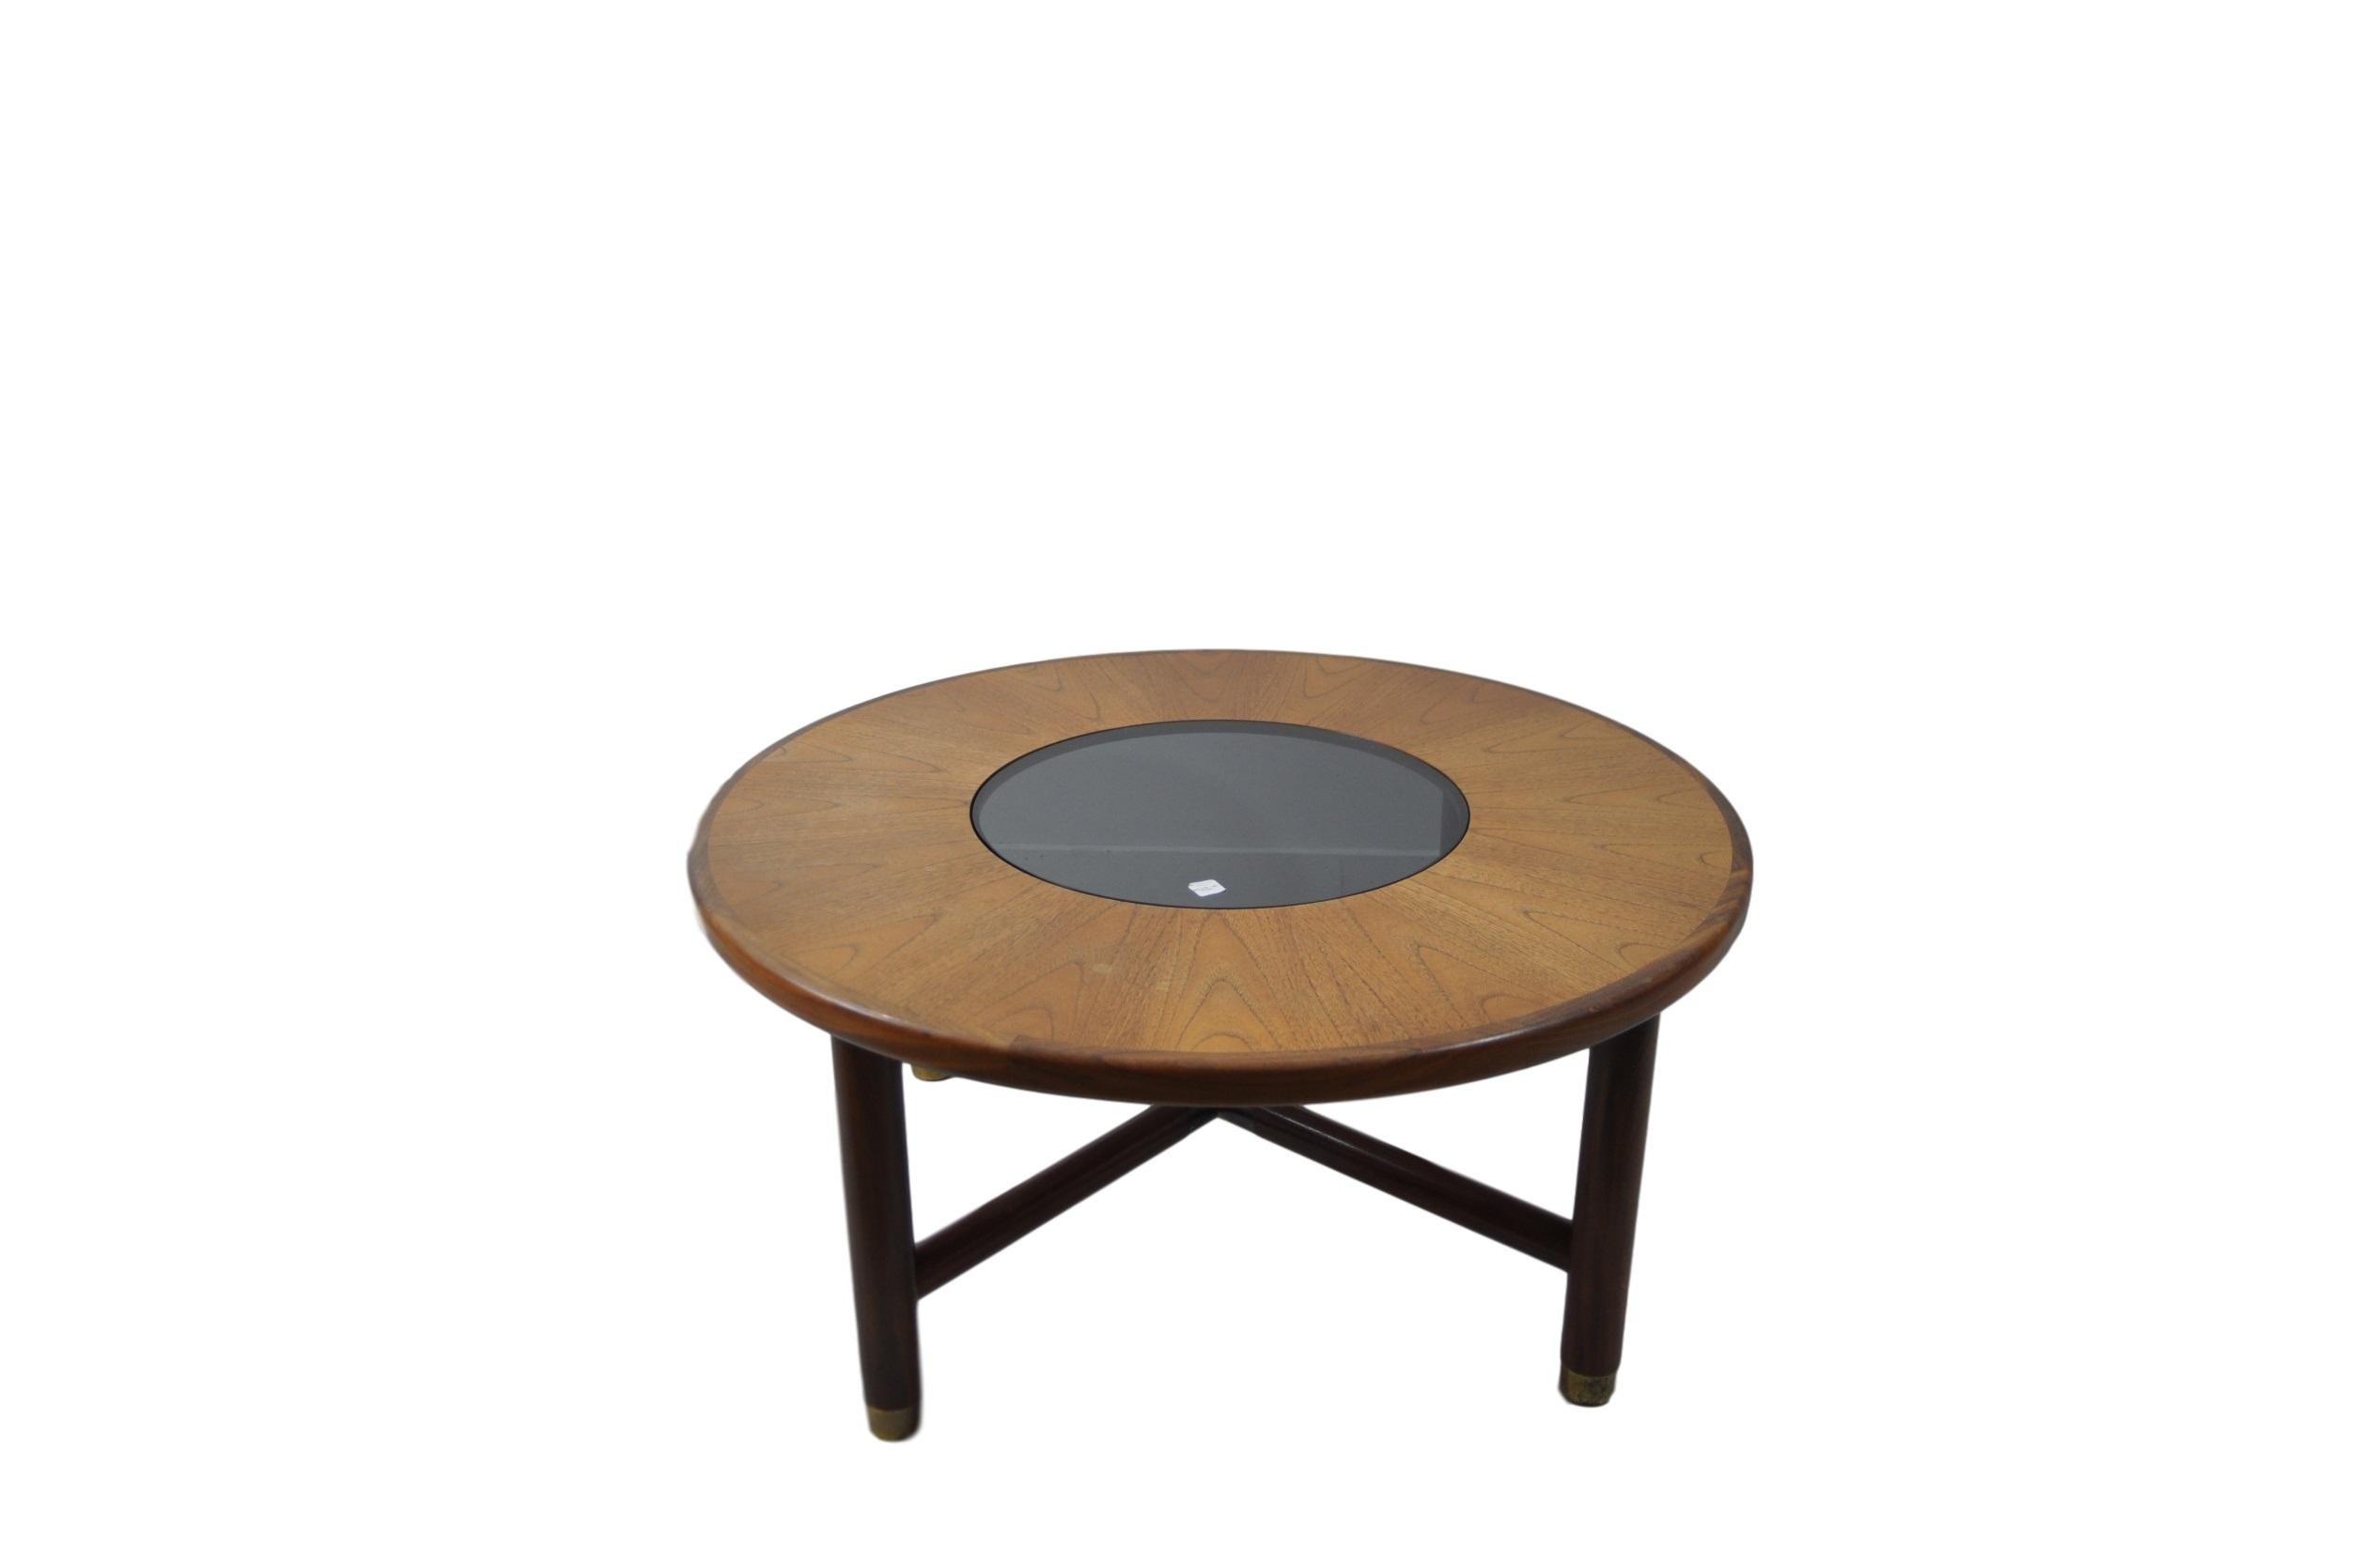 Rare round teak and smoked glass coffee table by G-Plan, circa 1960. This particular table is of the lighter teak variant and some minimal wear around the brass plate detailing.